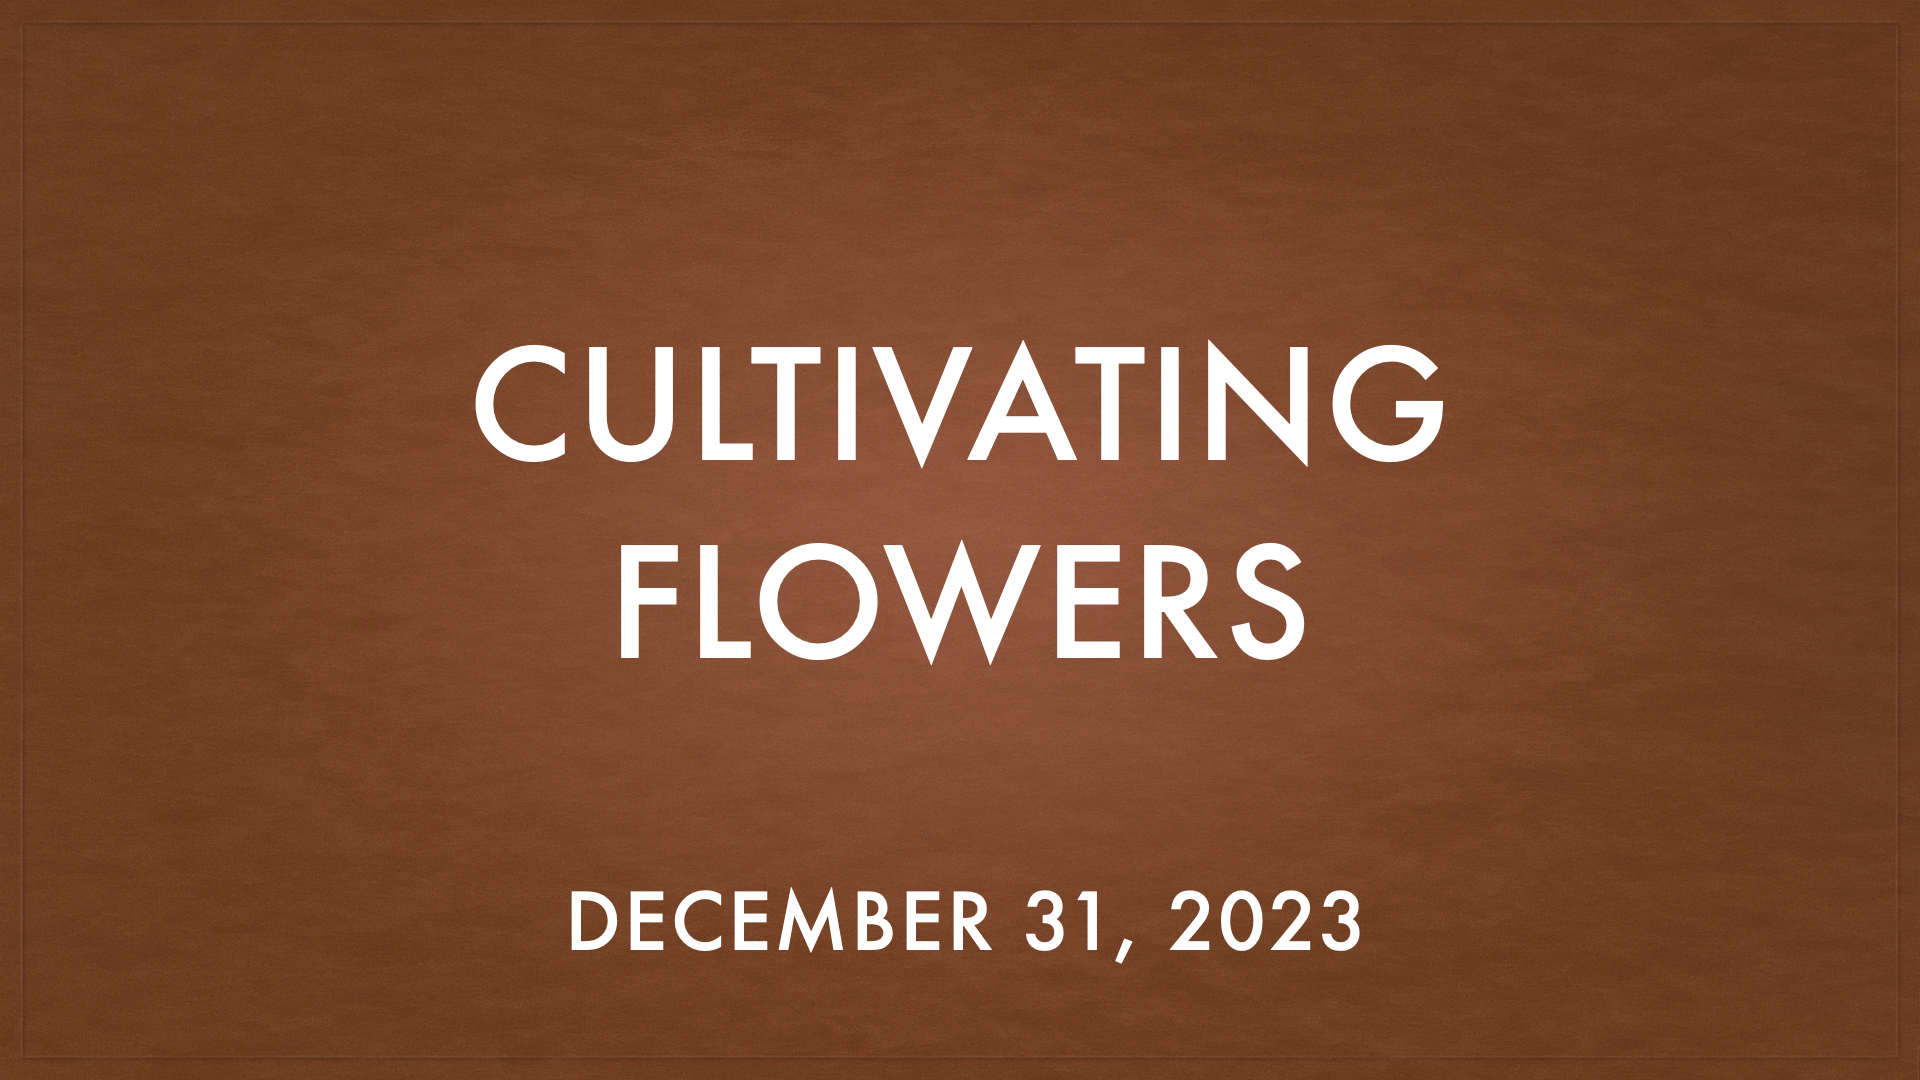 Cultivating Flowers by Missy Grinnell